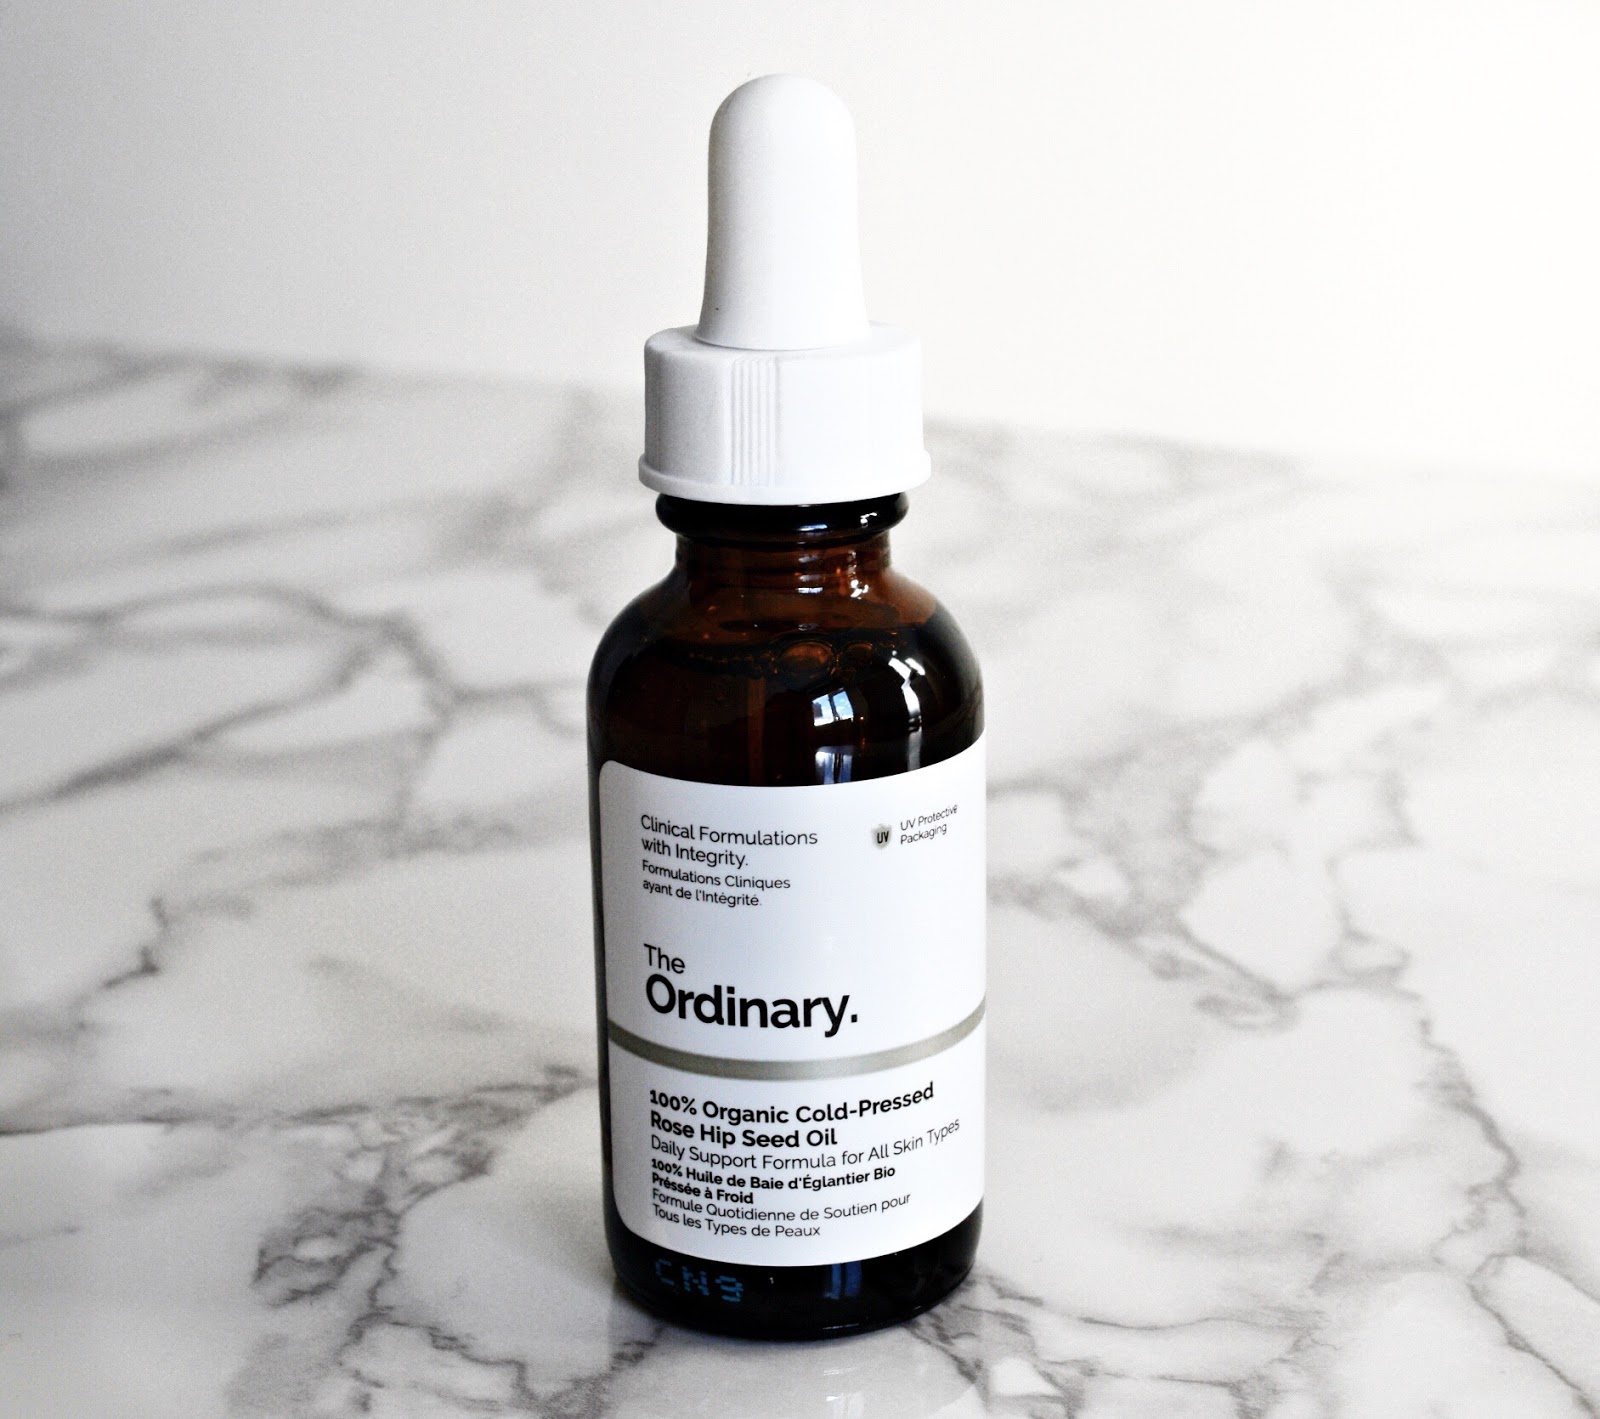 the ordinary cold-pressed rose hip seed oil a review